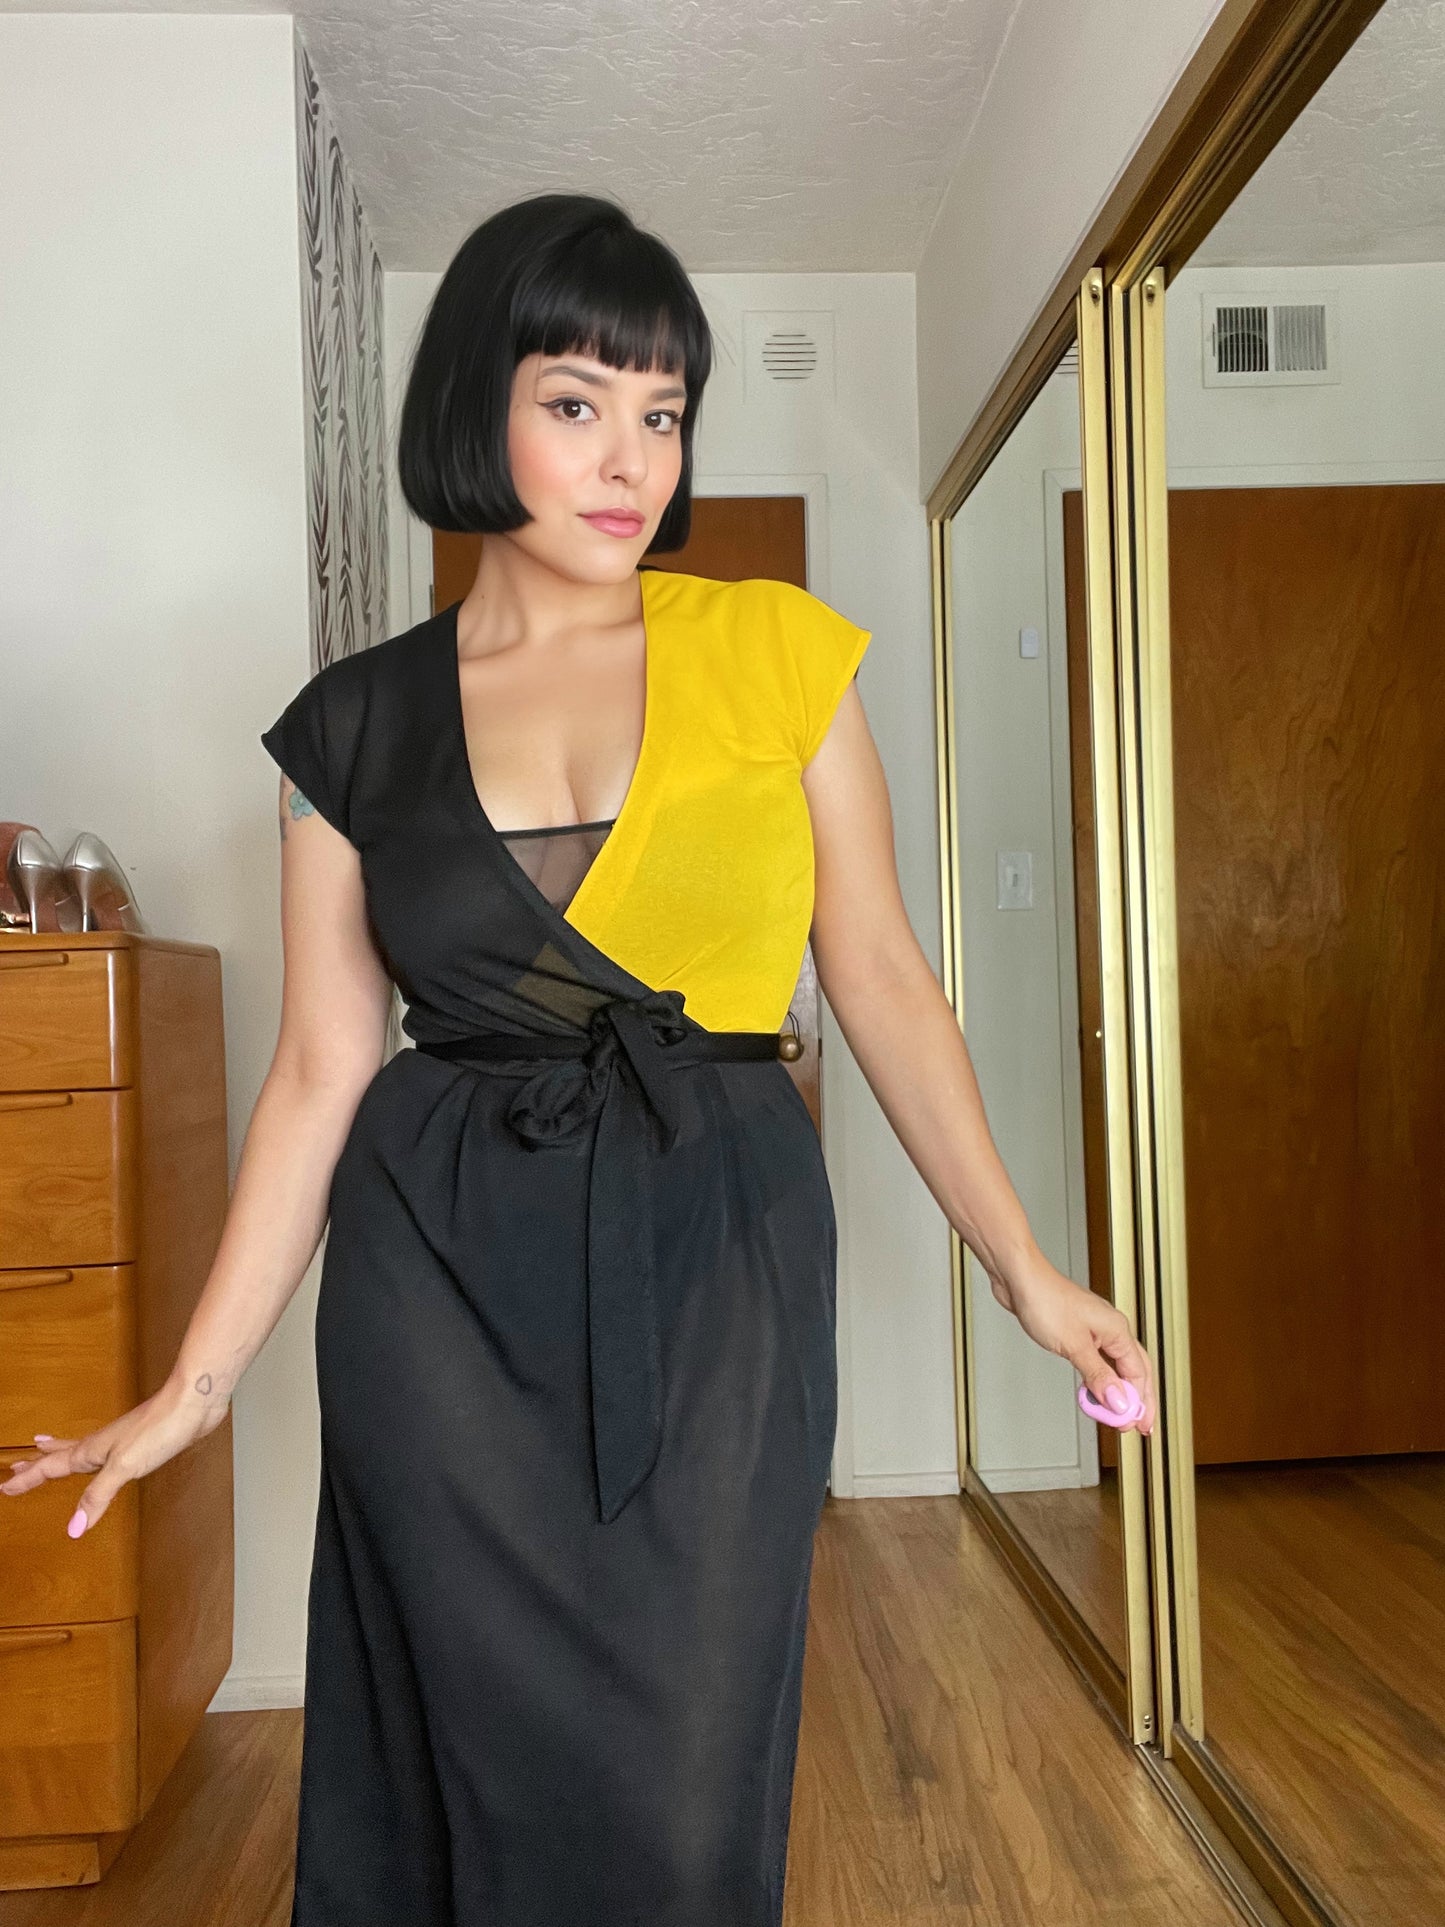 Vintage 70s "Foxy Lady San Francisco" Yellow and Black Block Color Semi Sheer Maxi Dress Fits Sizes XS-S, Possible M